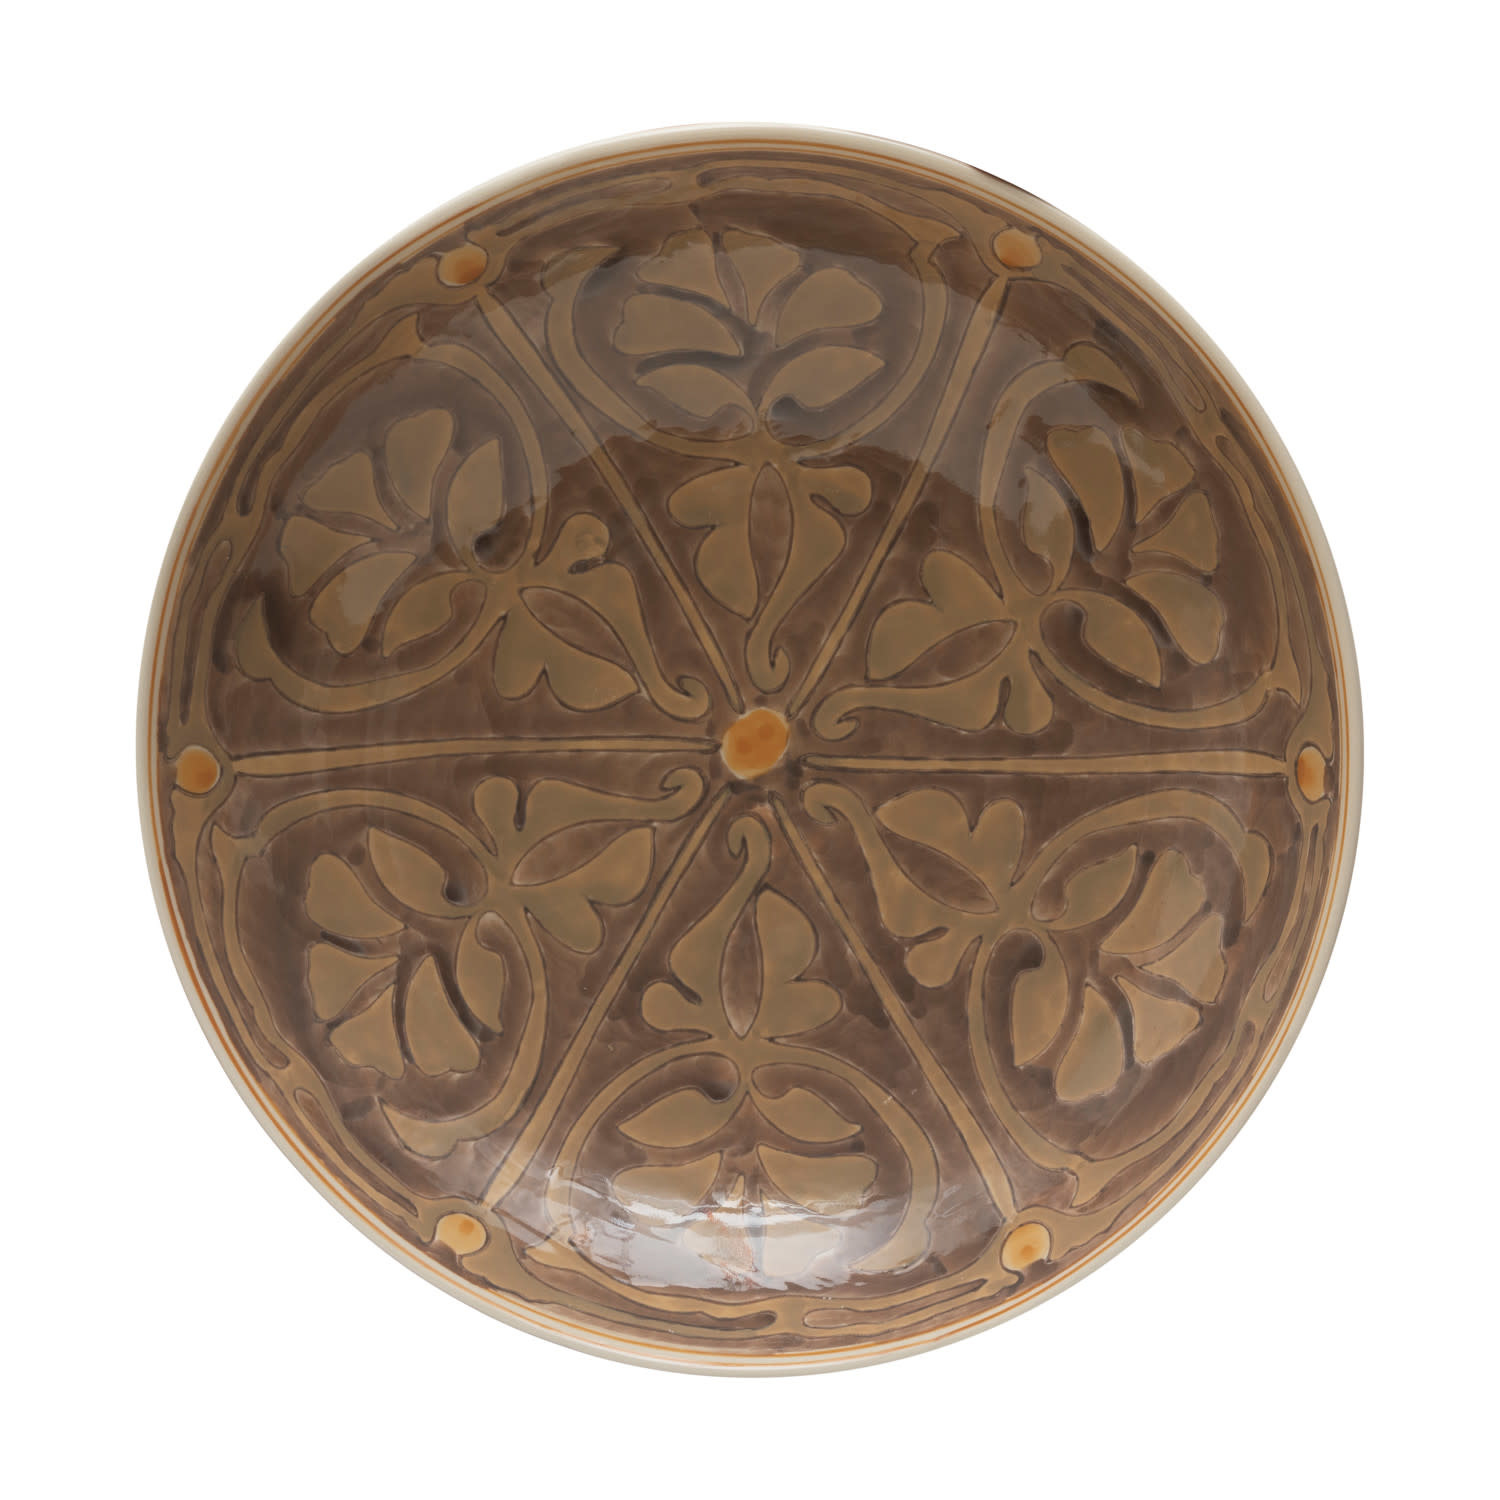 Hand-Painted Stoneware Serving Bowl w/ Pattern, Brown & Taupe, Available for local pick up